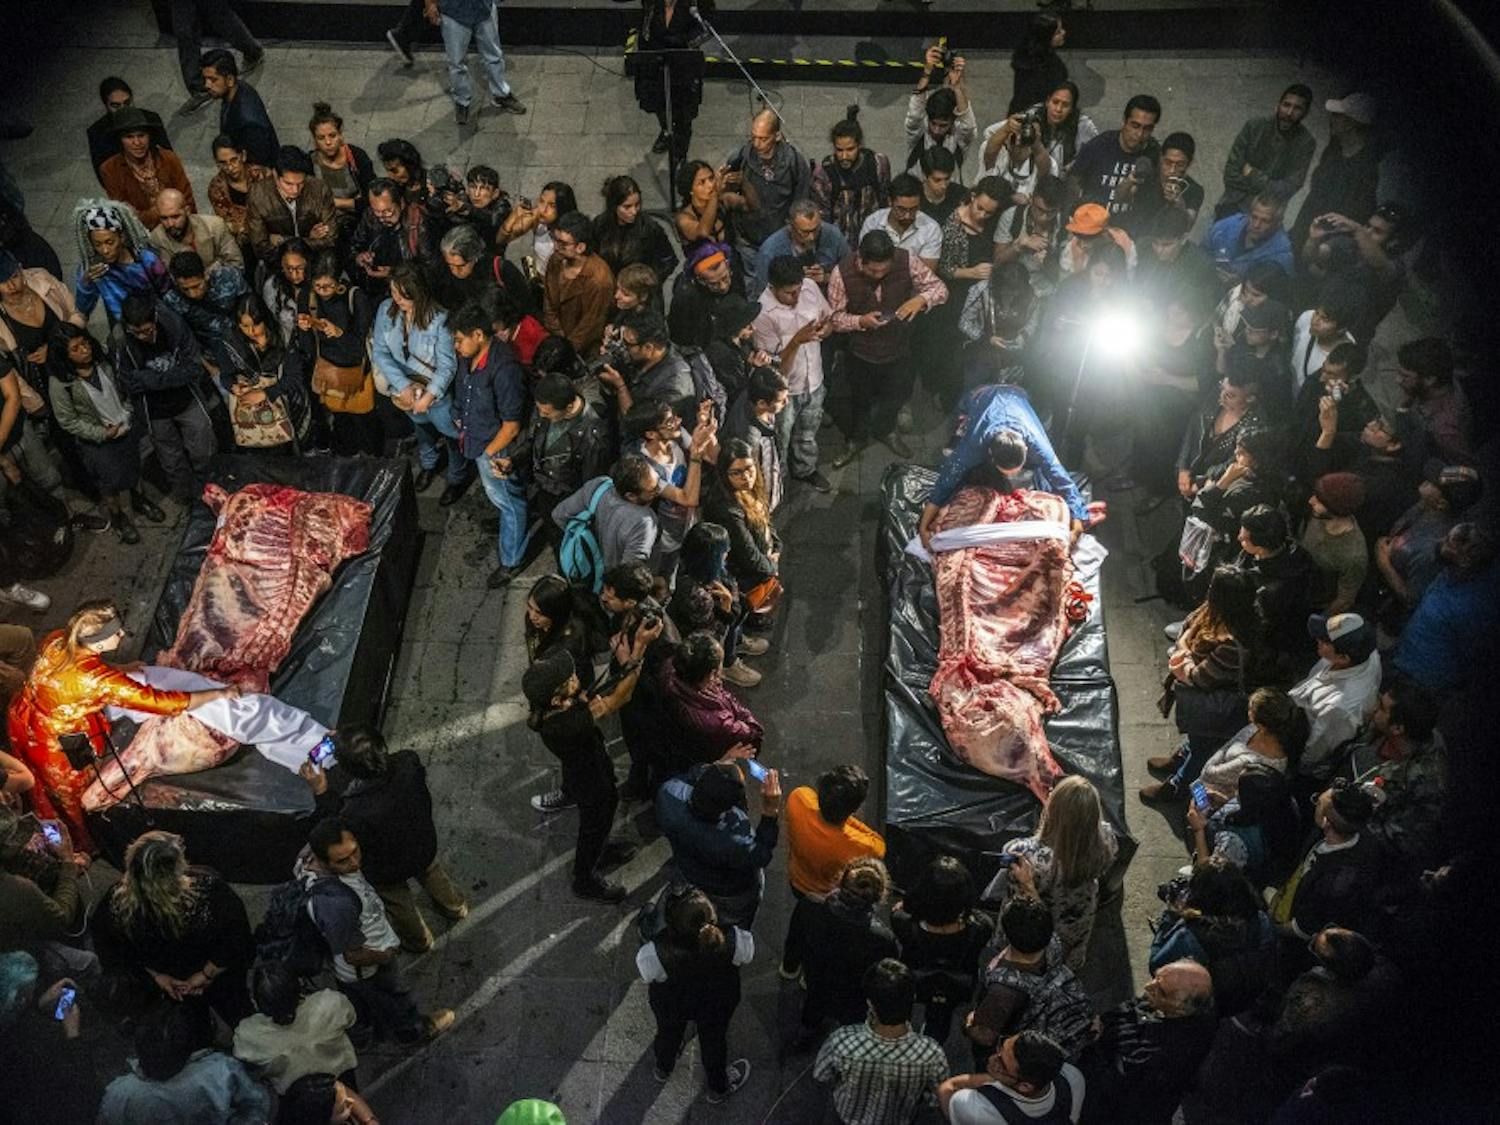 Mexico City performance art explaining the cruelty of Mexico and United States politicians July 7, 2018.